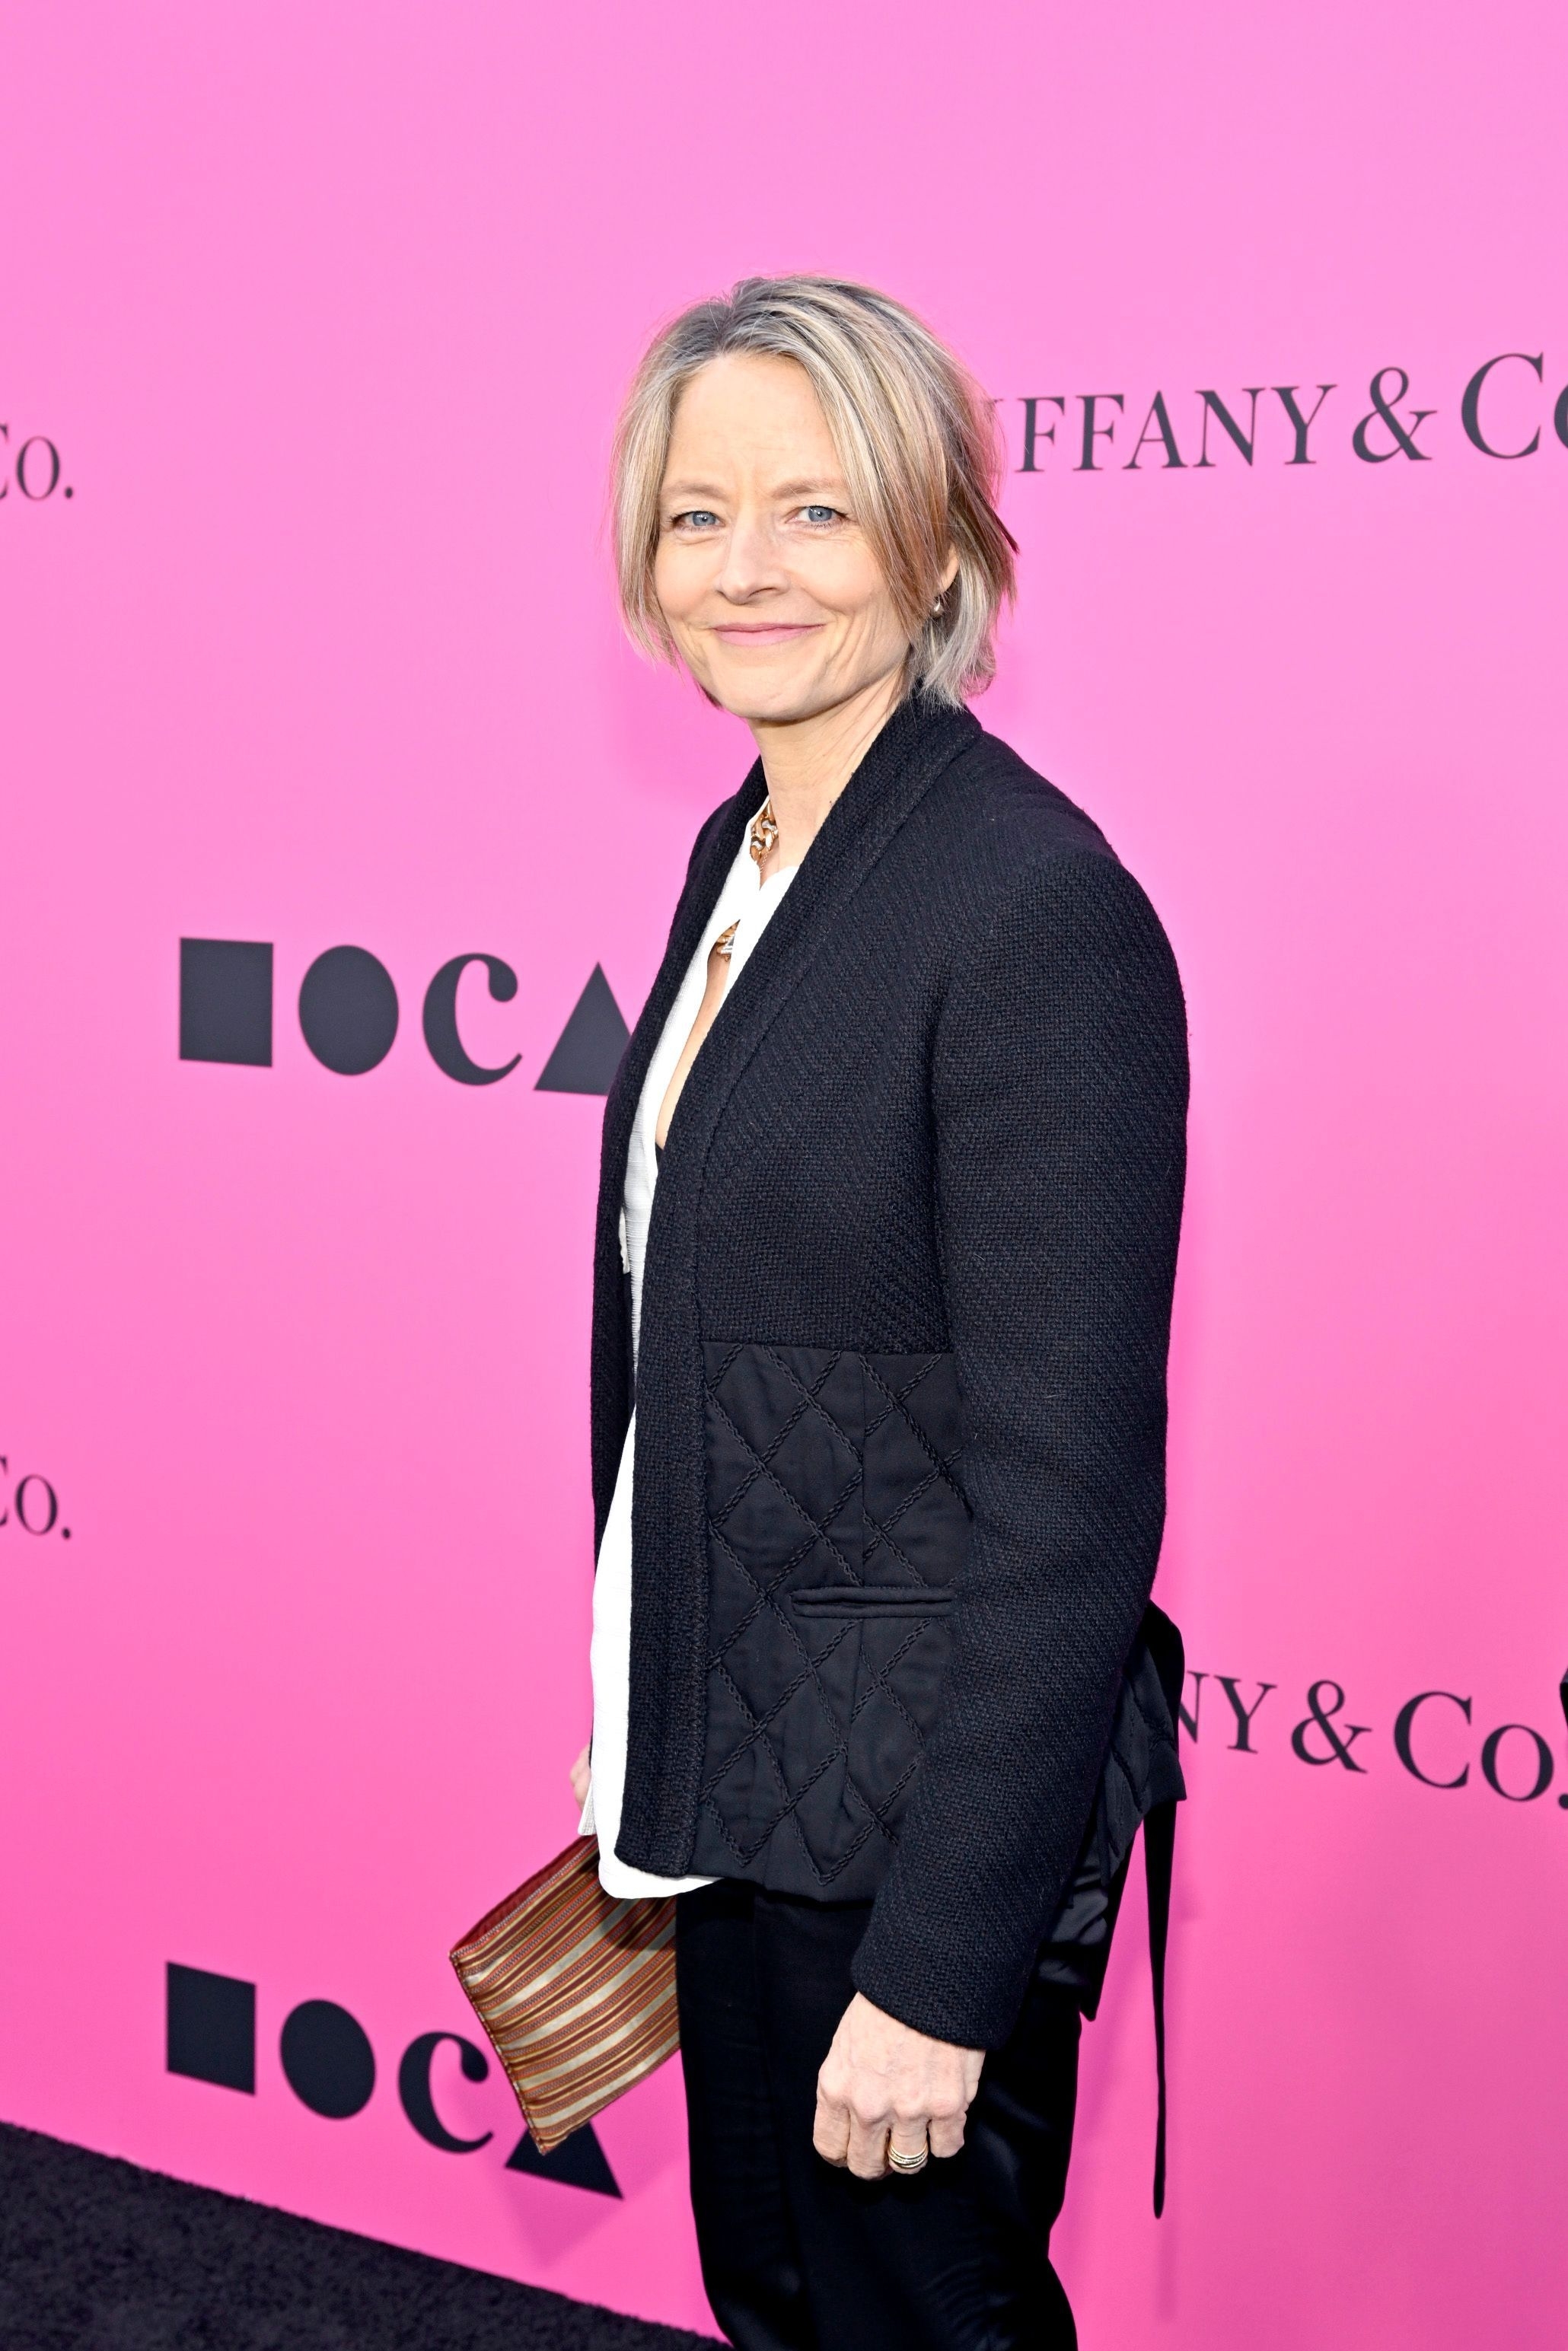 Close-up of Jodie smiling in a jacket and pants at a media event